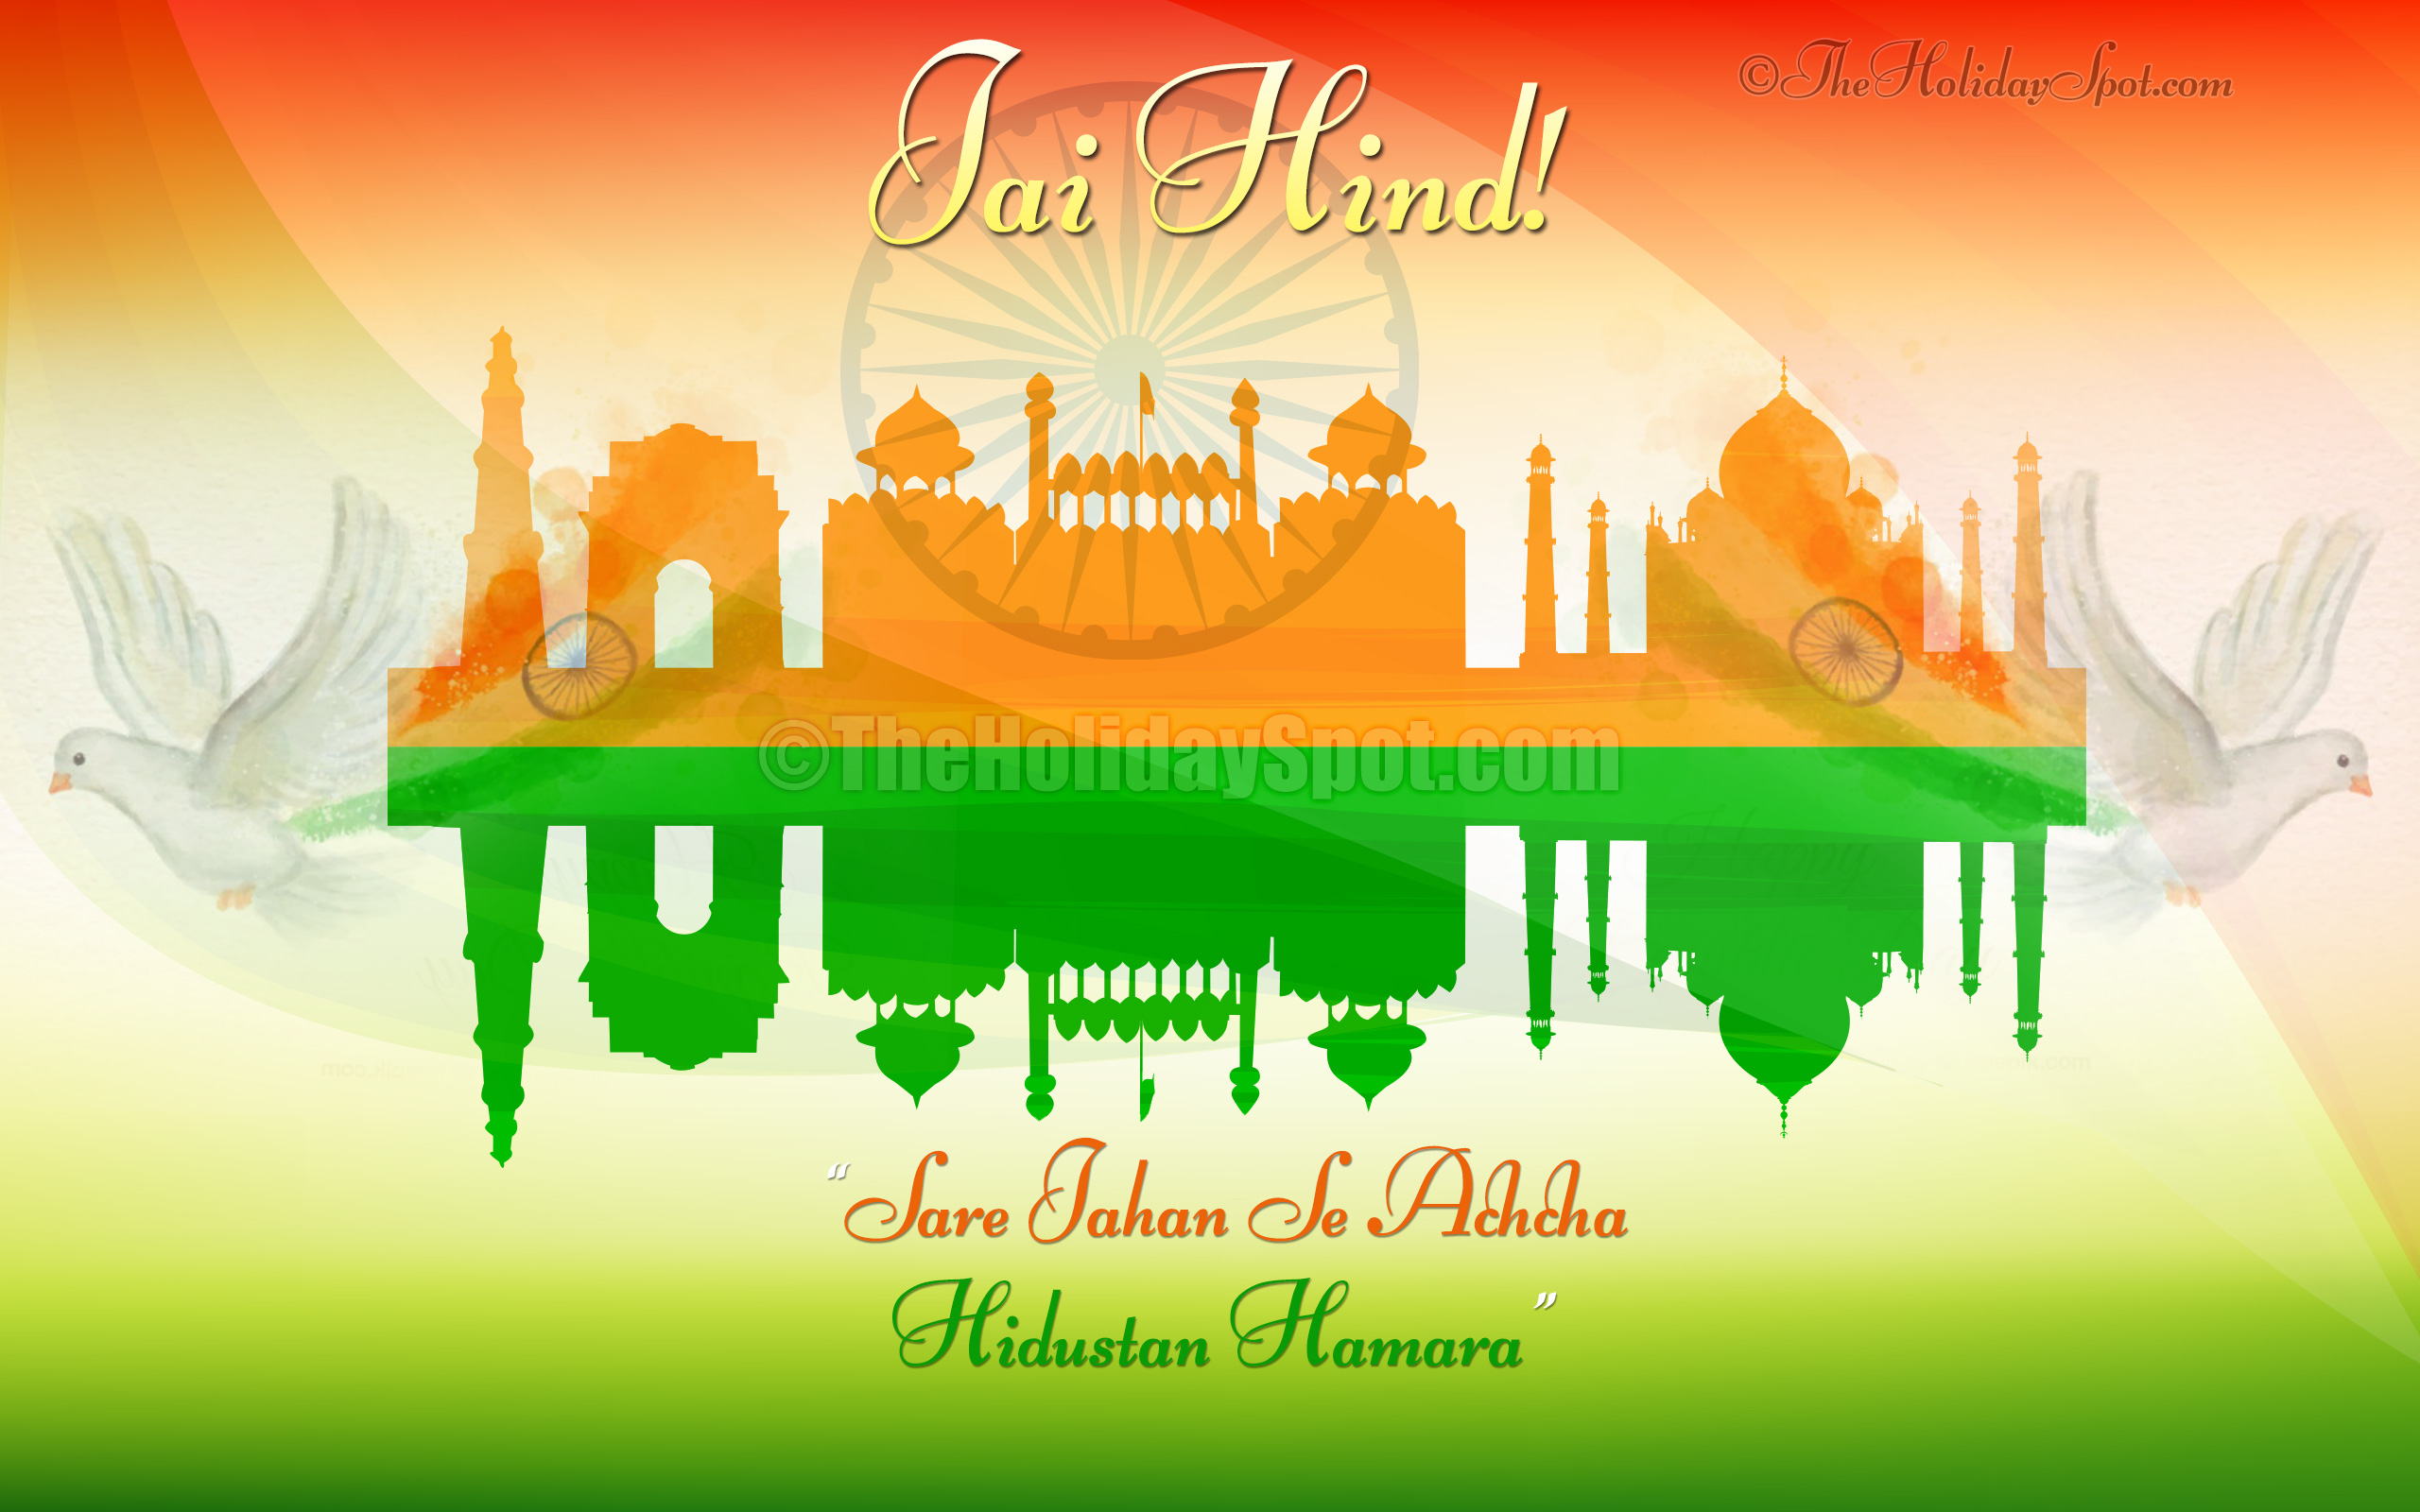 15th August Indian Independence Day Wallpaper